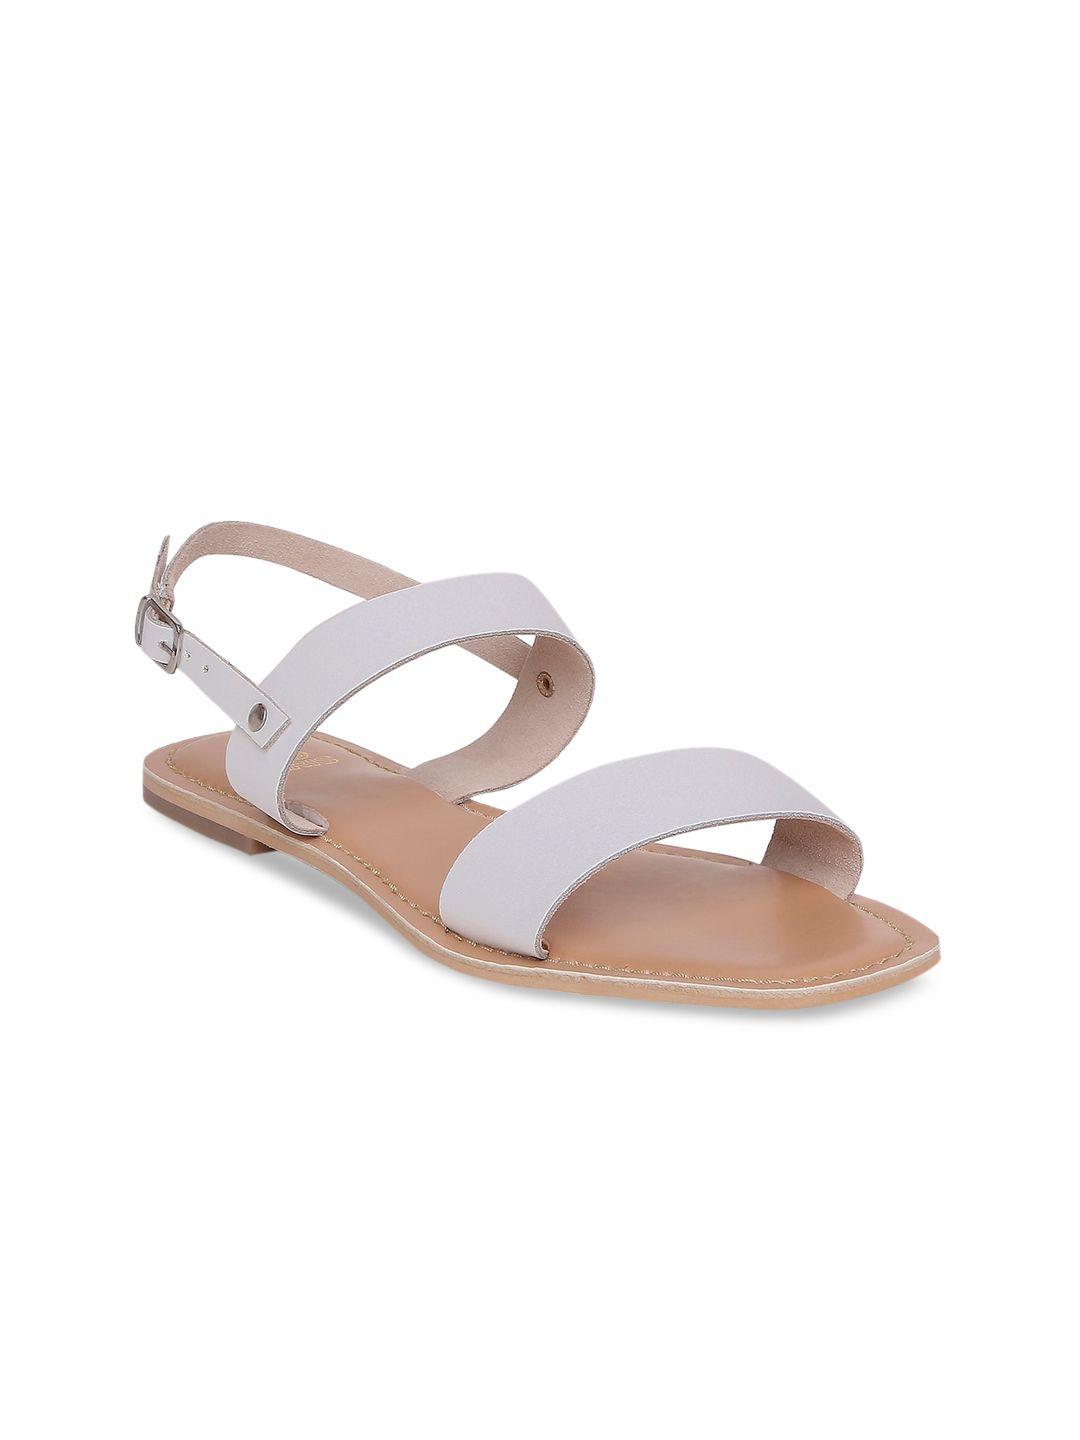 Tao Paris Women White Solid Leather Open Toe Flats with Buckles